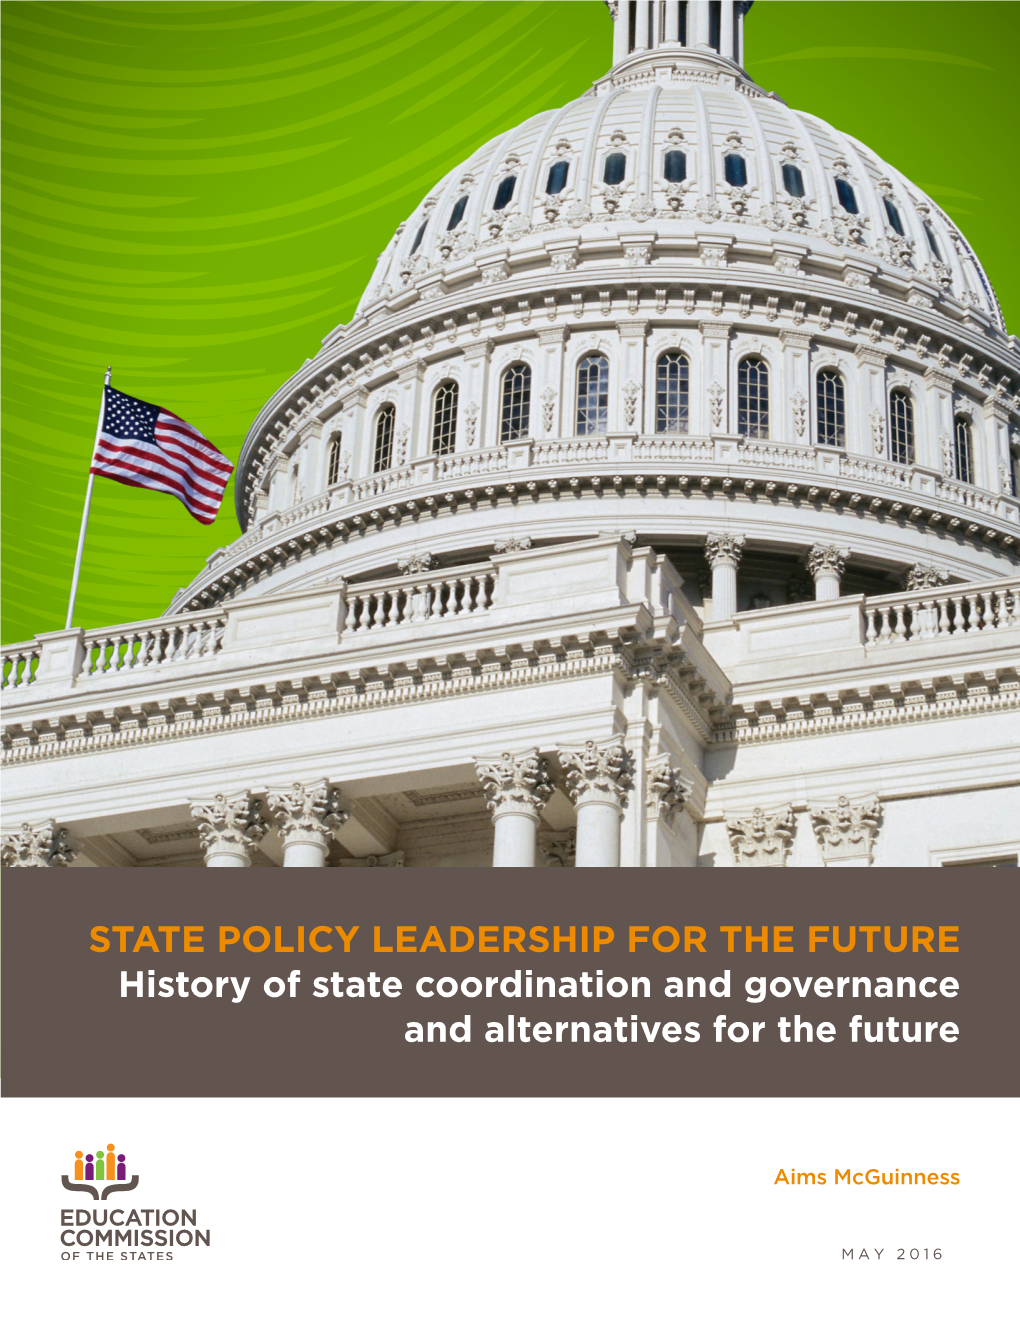 STATE POLICY LEADERSHIP for the FUTURE History of State Coordination and Governance and Alternatives for the Future